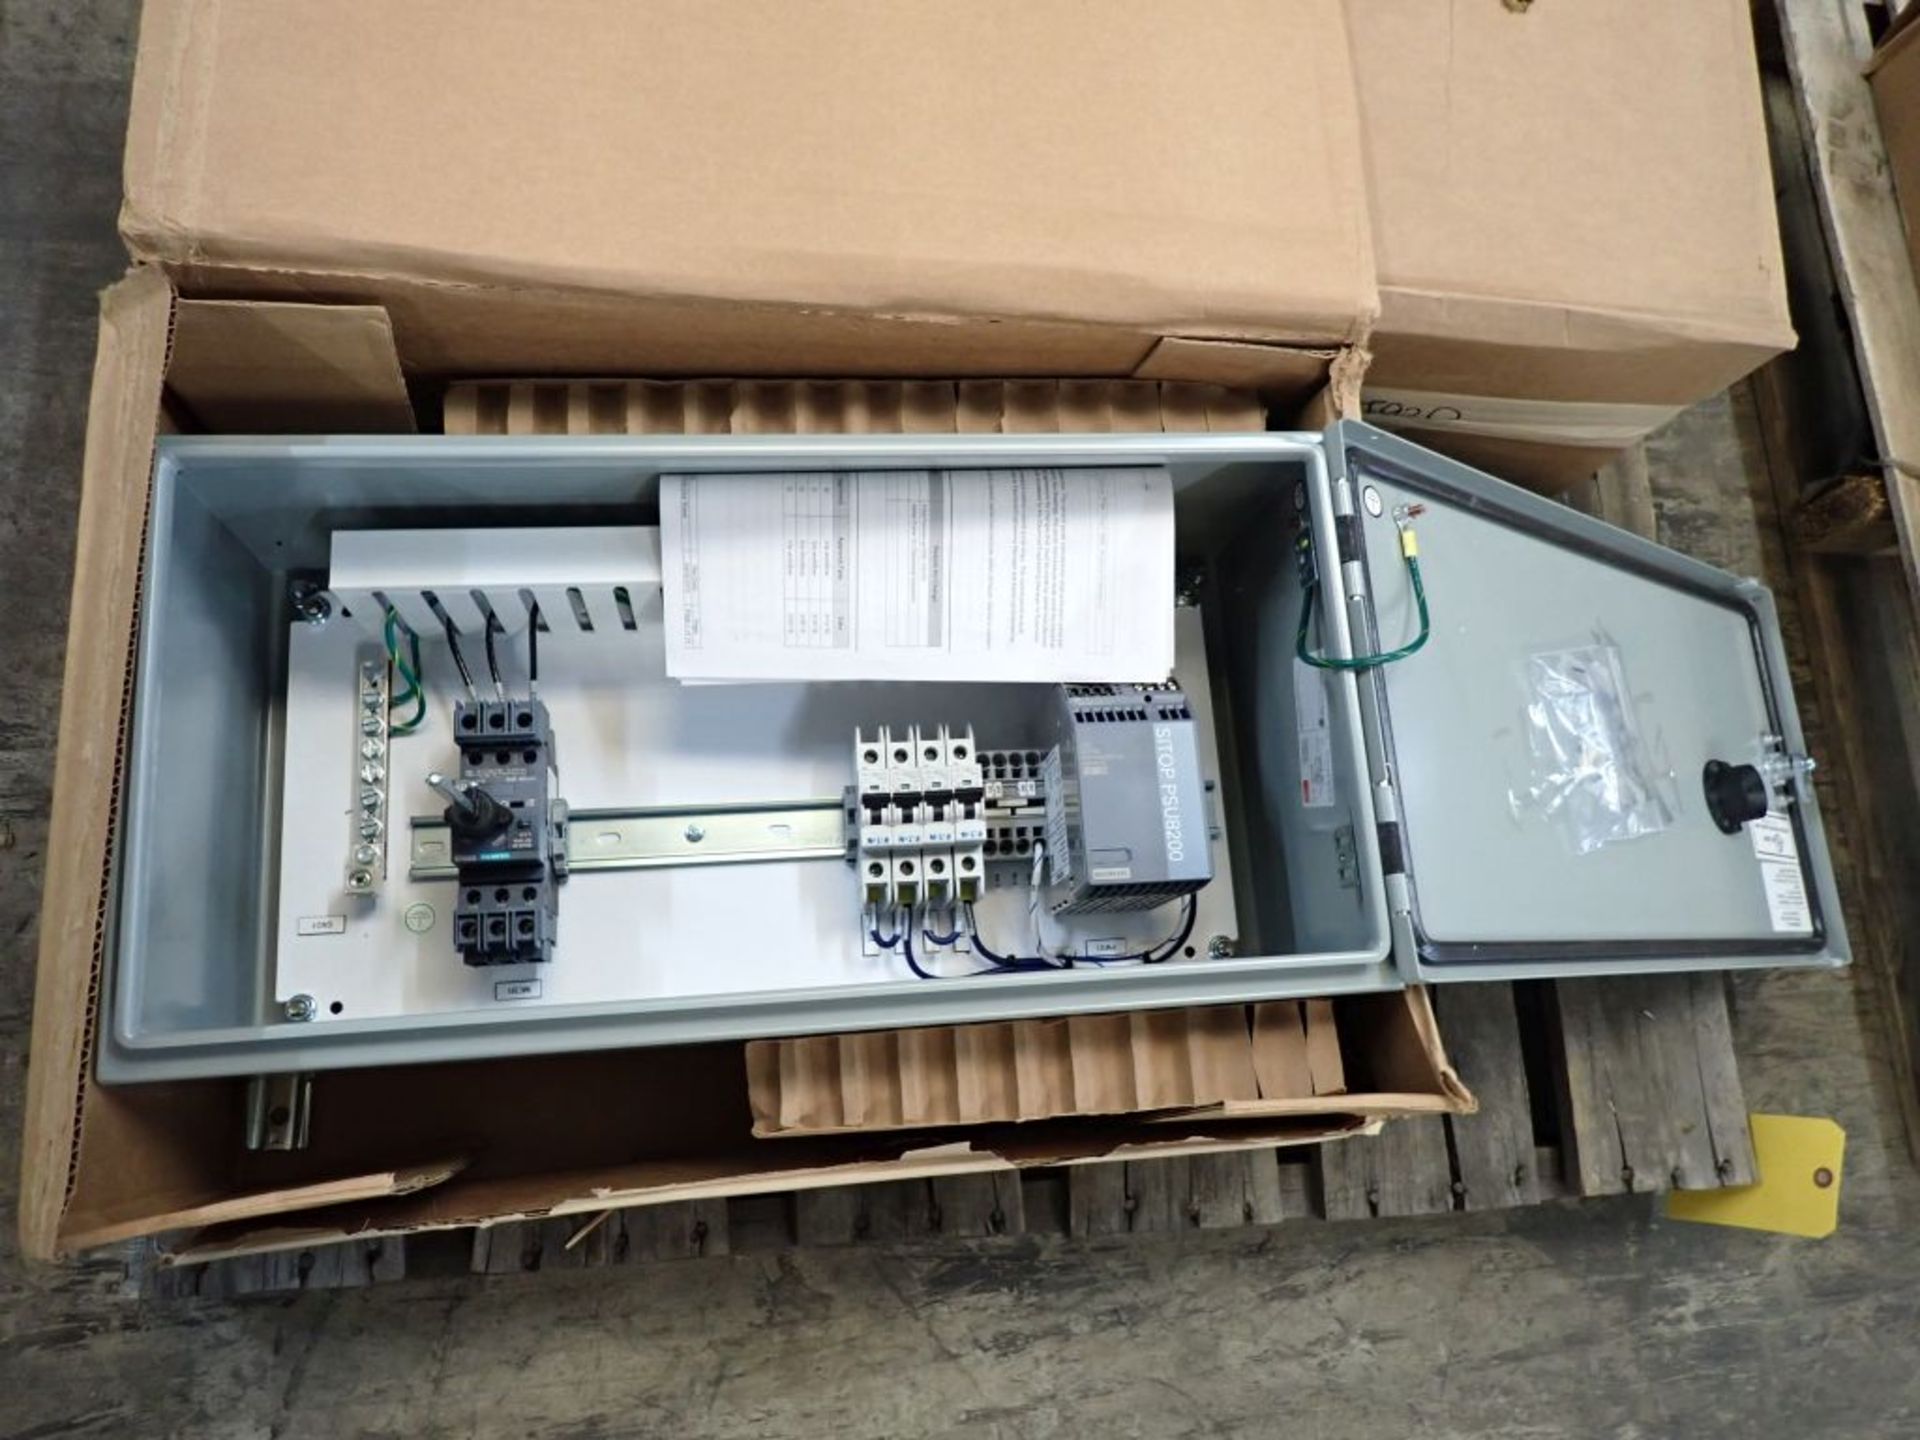 Lot of (2) Hoffman Nvent Industrial Control Panel Enclosures with Contents - Image 11 of 15